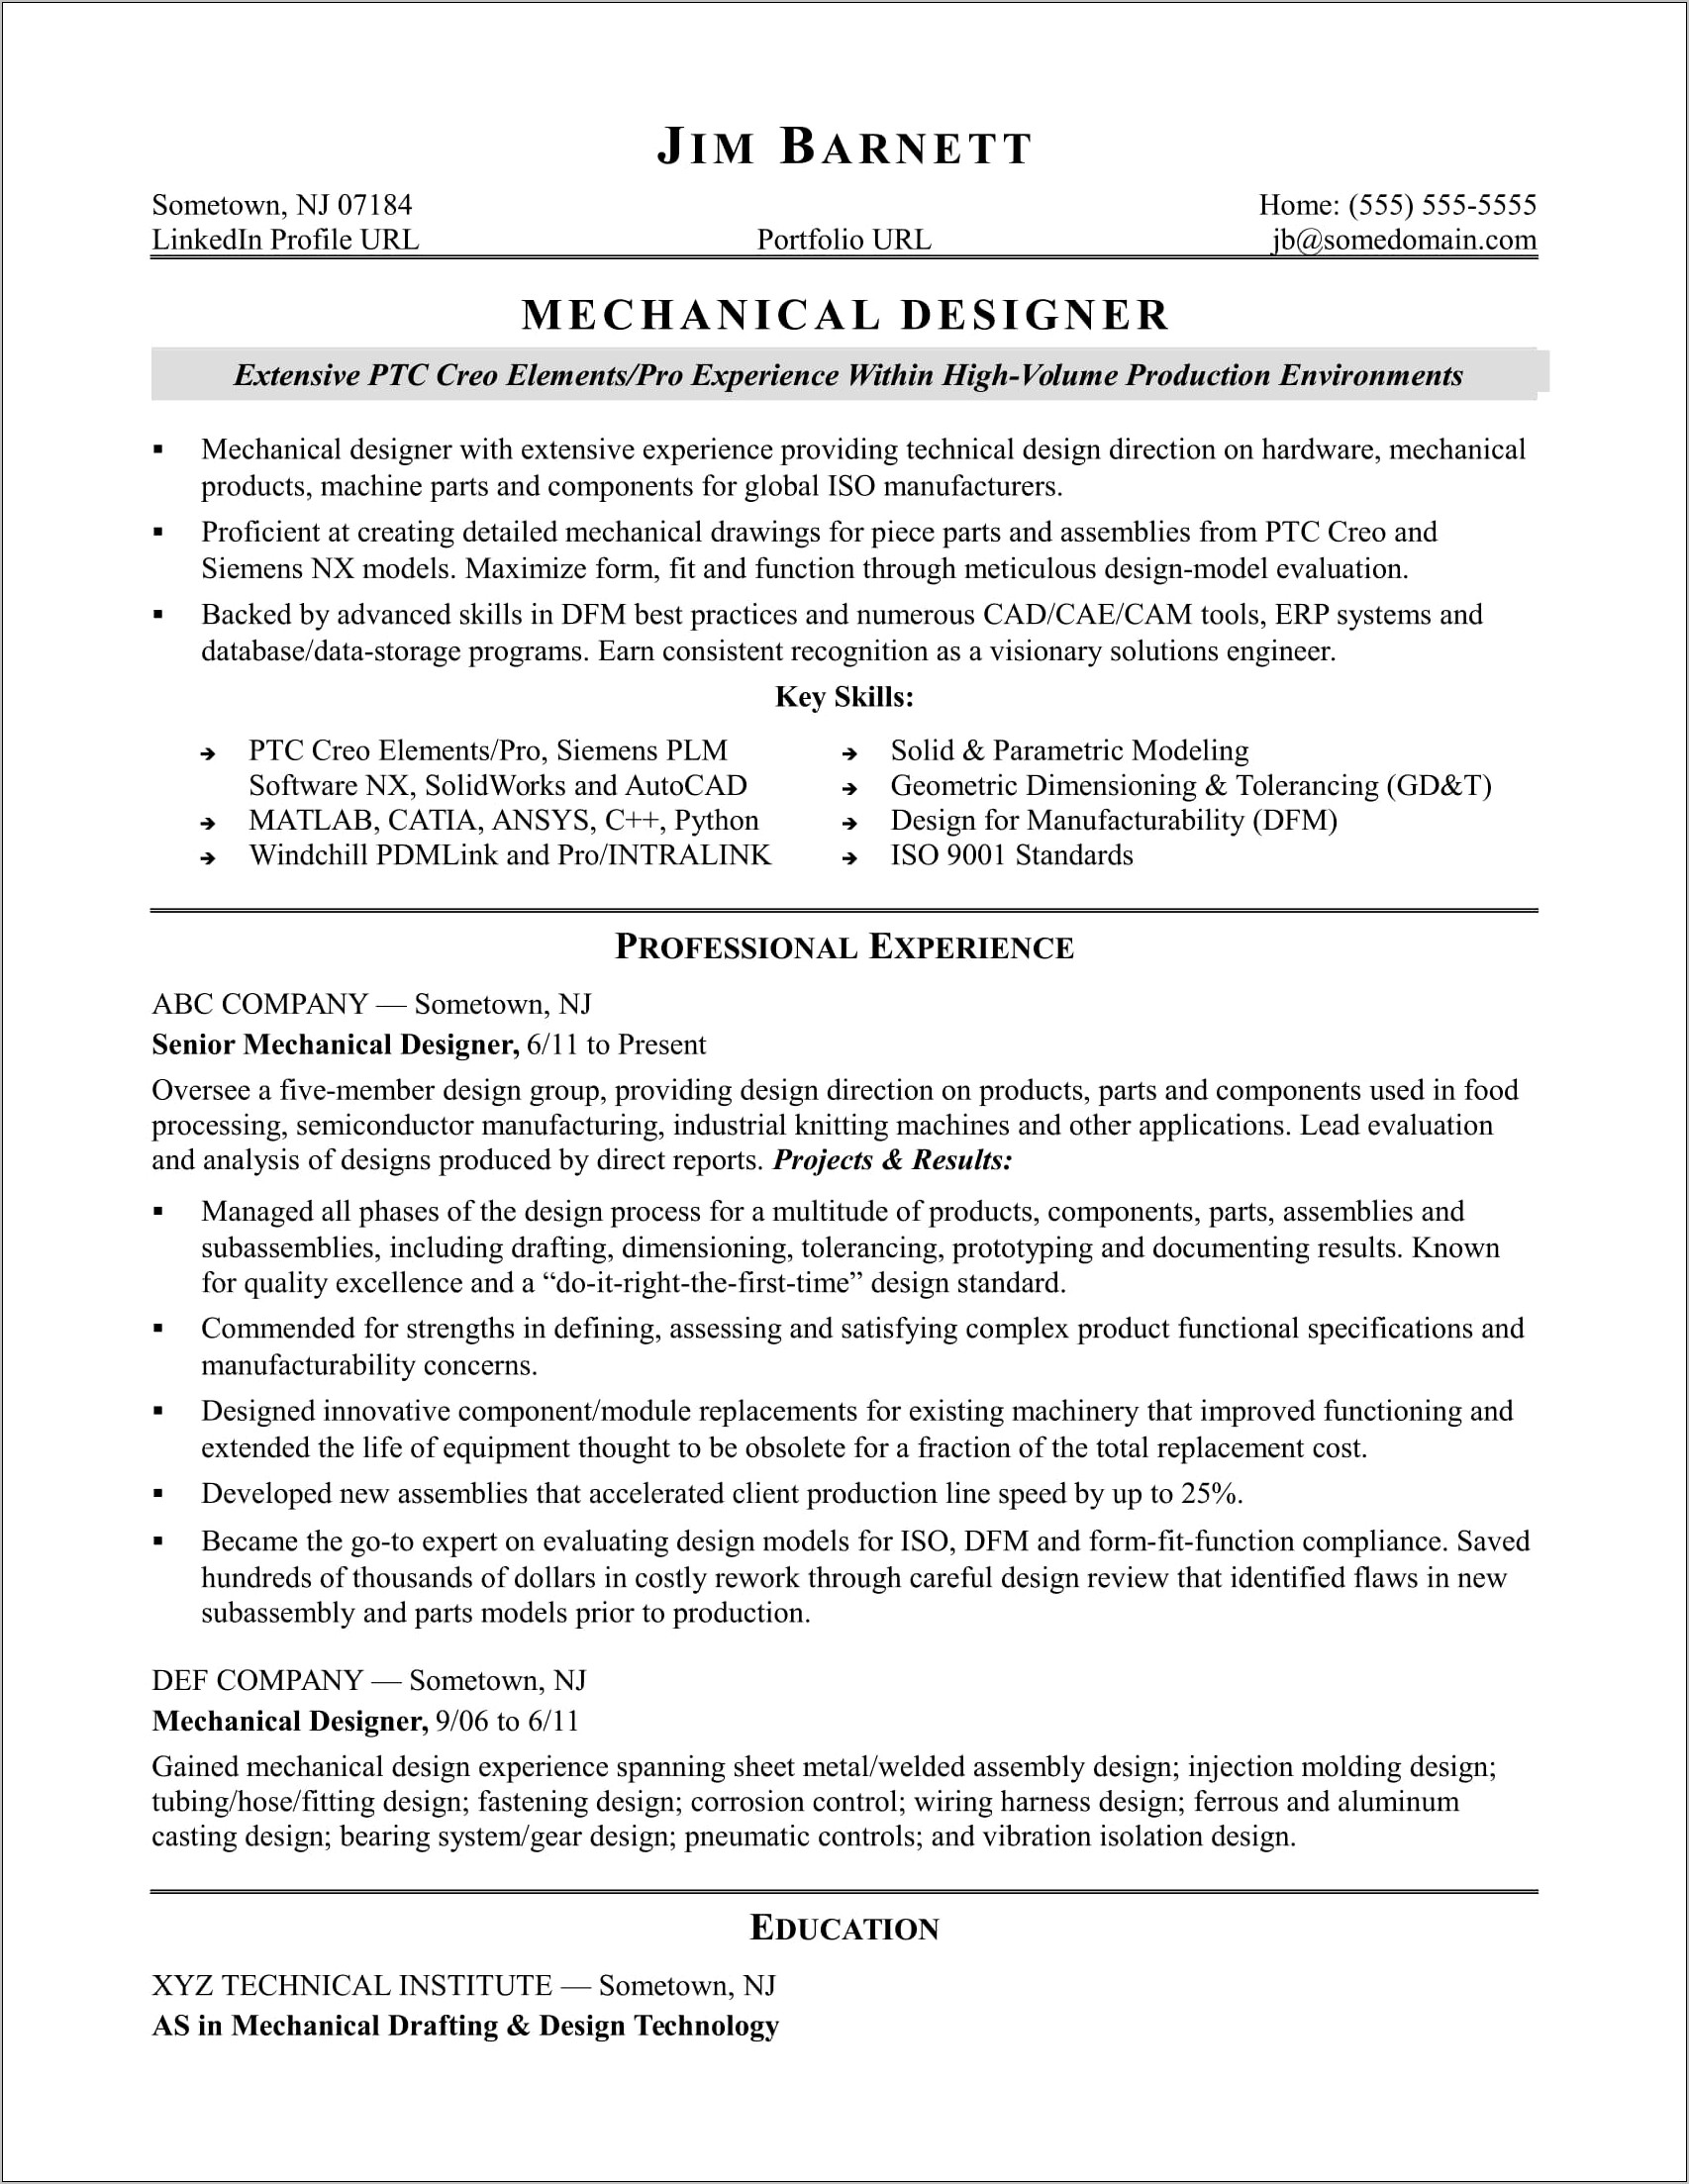 Resume After One Year Experience Sample